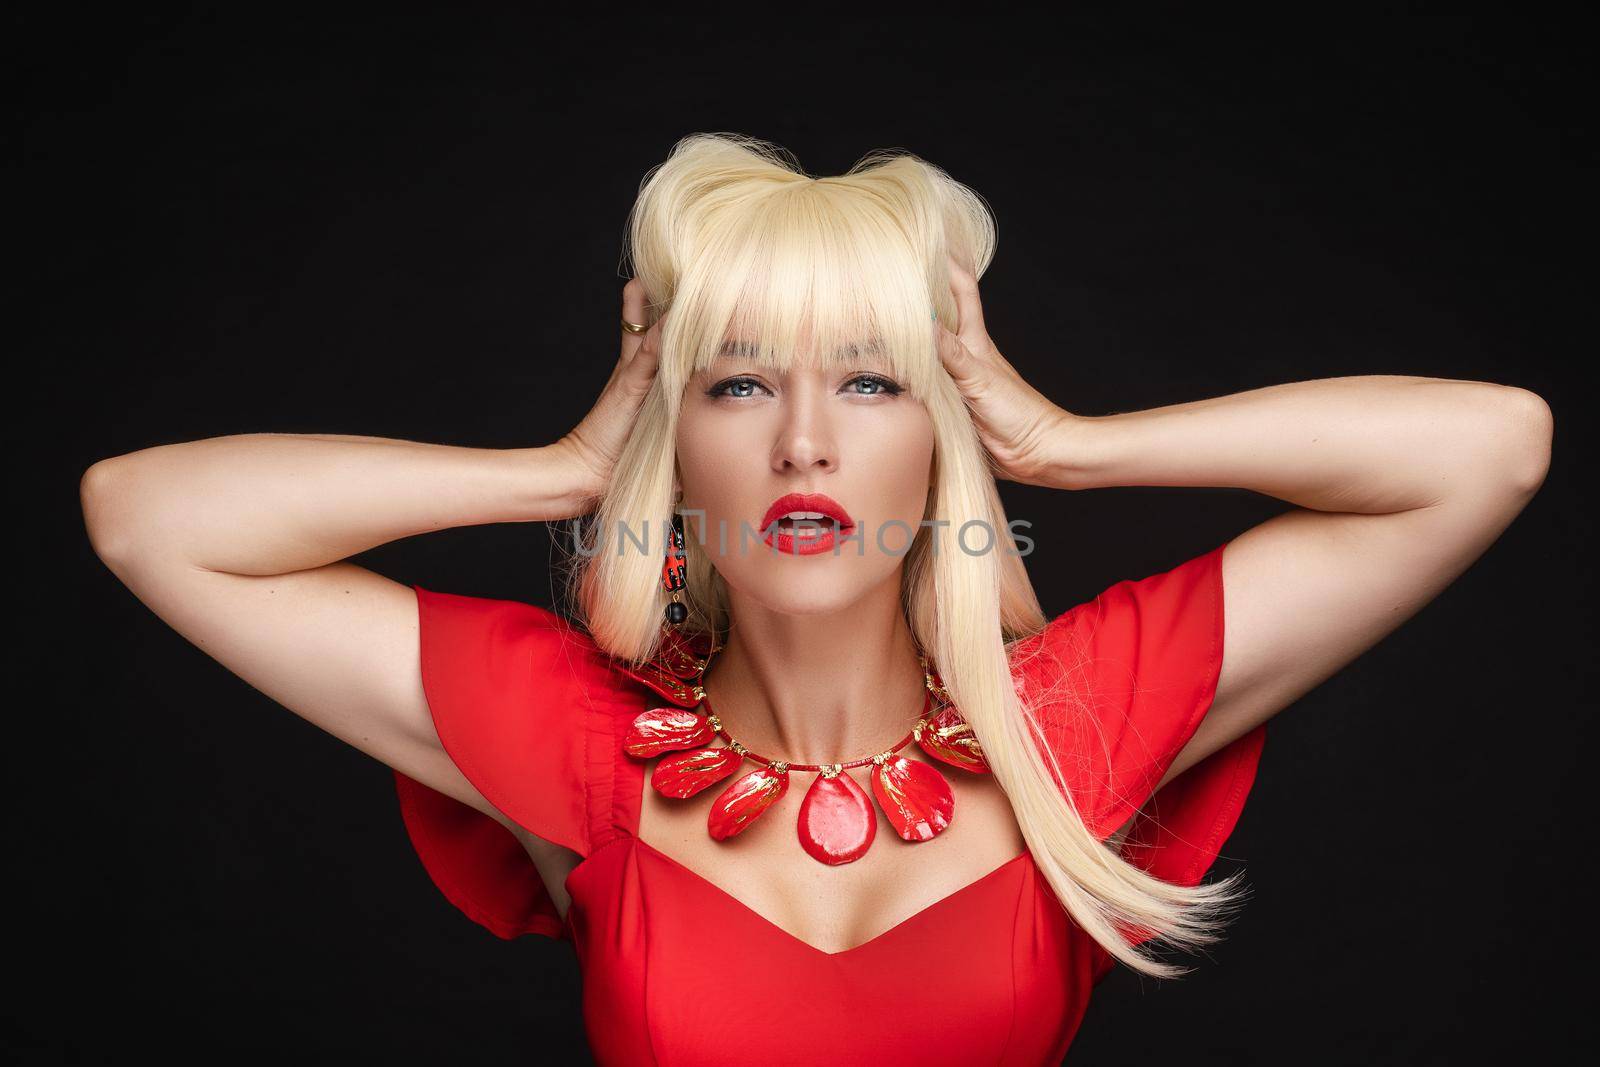 Stock headshot of sexy blonde woman with red lips in red dress and red accessories holding arms in her hair. She is opening her mouth slightly.